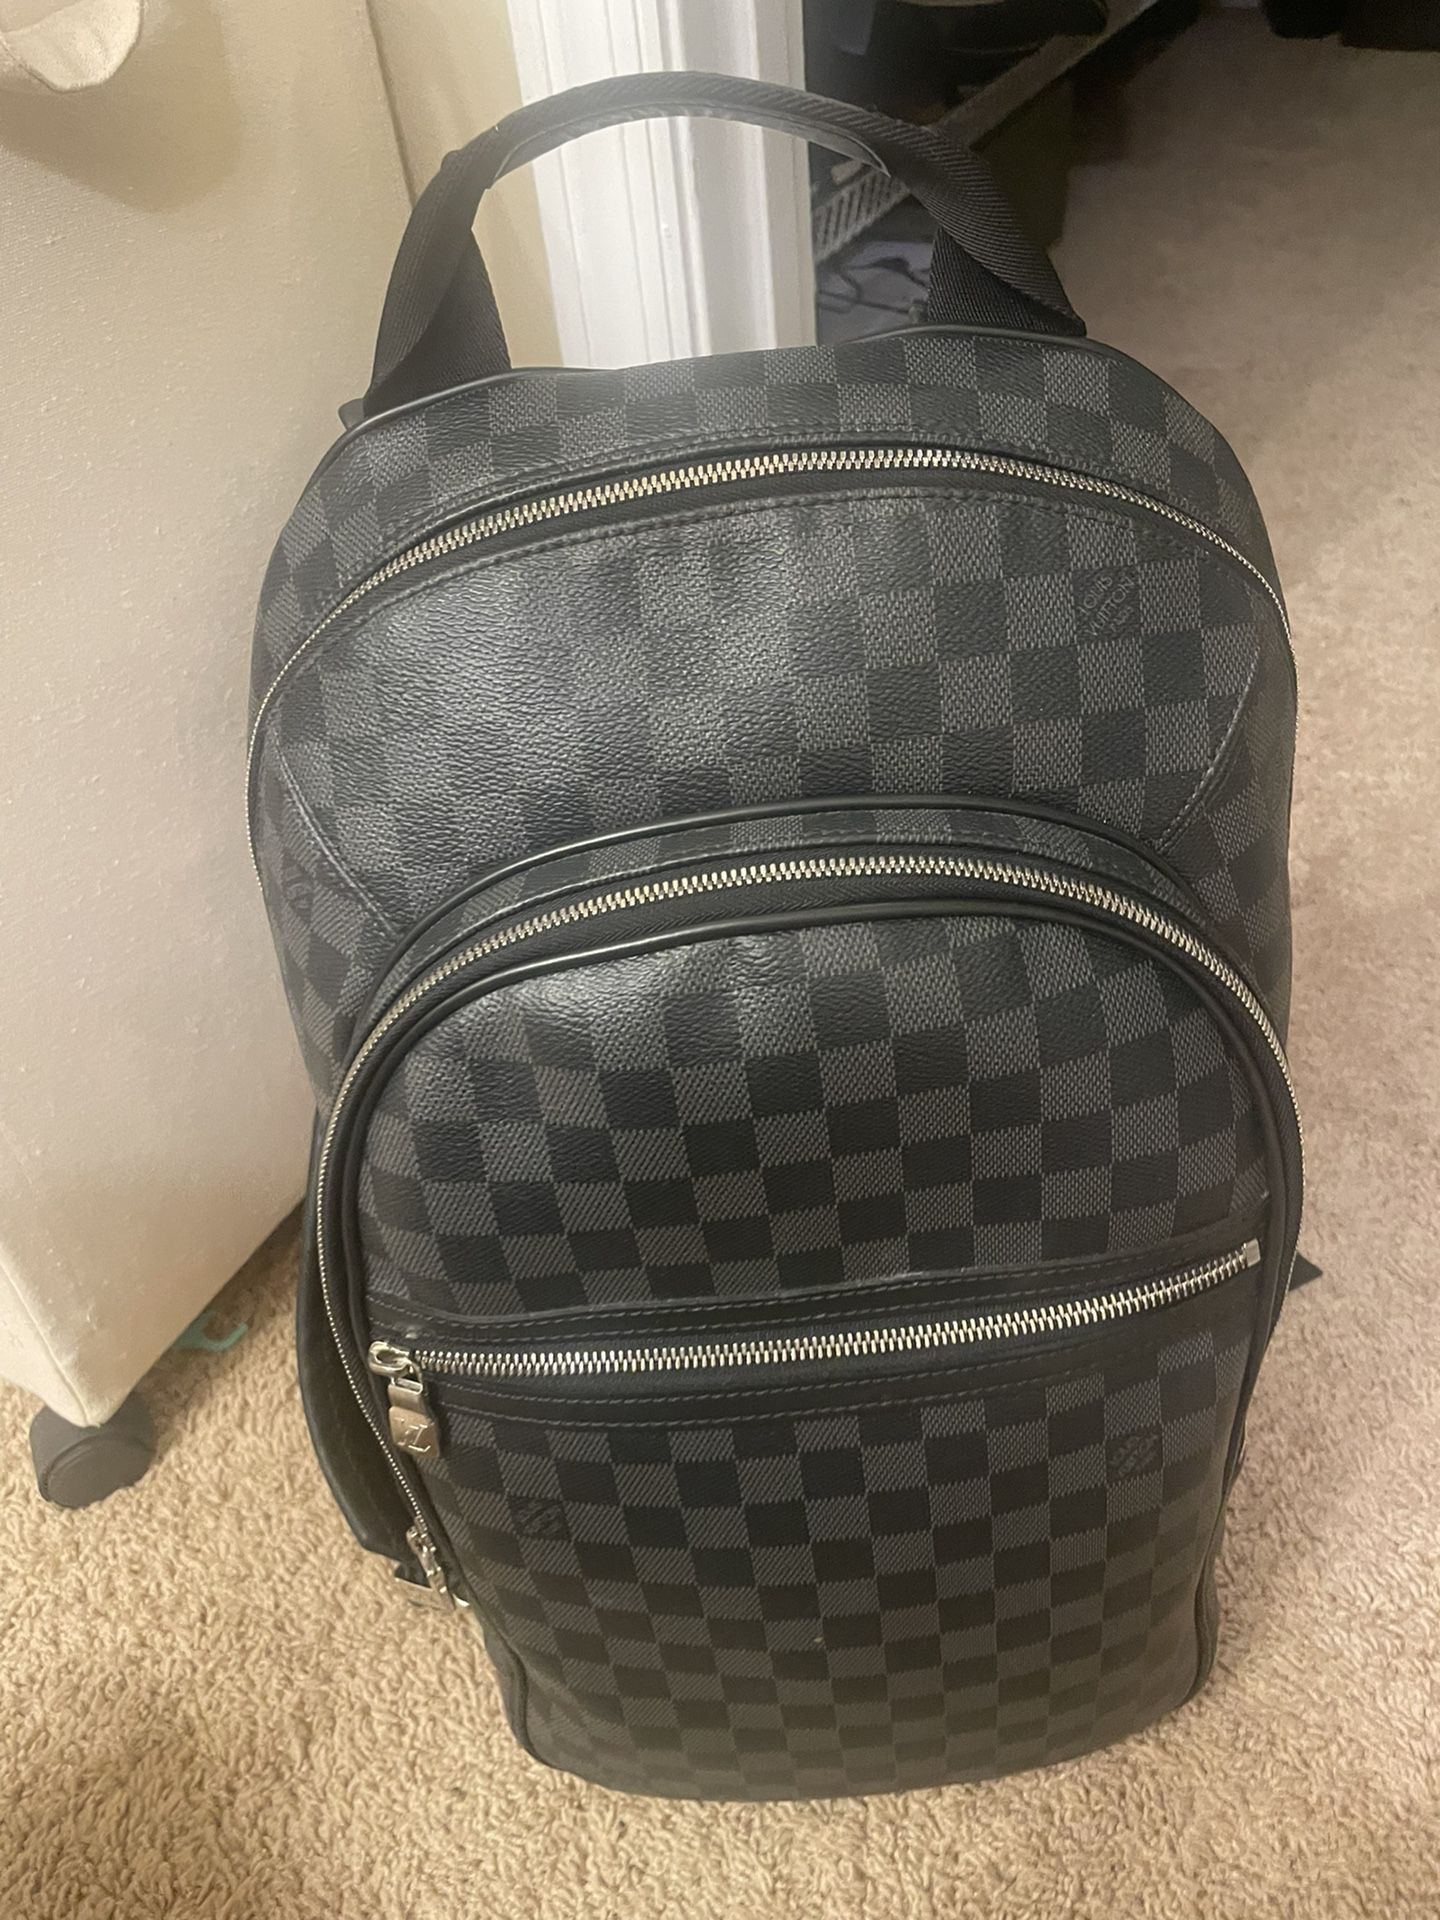 LV Michael Back Nv2 Damier Graphite- Great Condition for Sale in